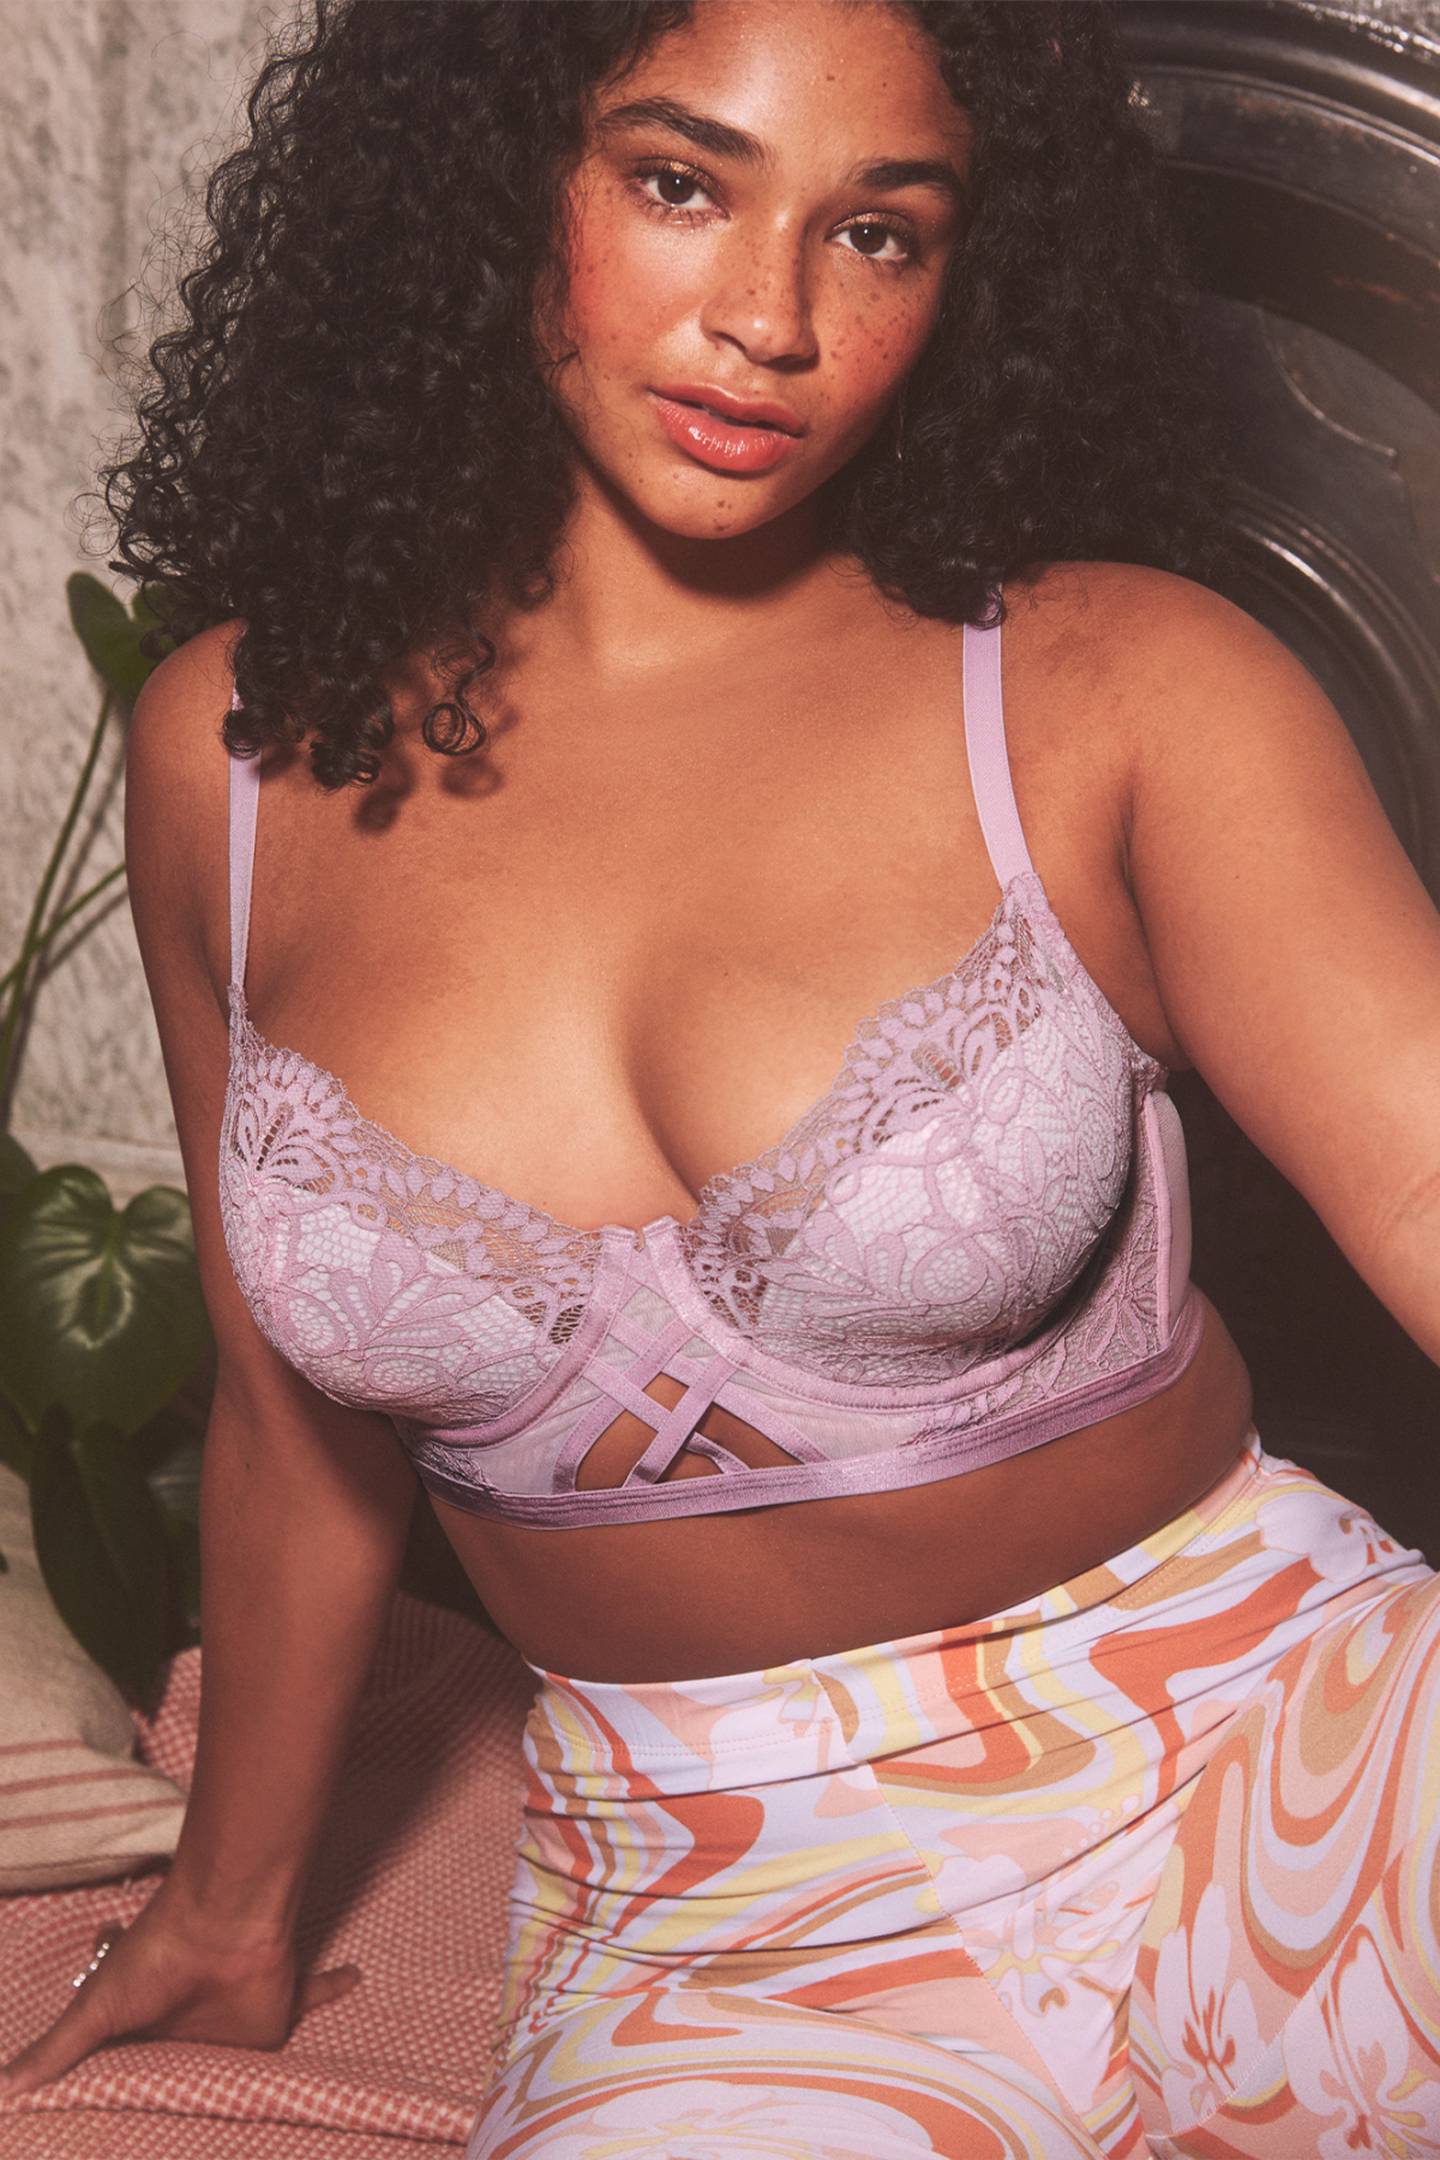 A model wears a lilac lace detailed bra with wave patterned leggings for an Adore Me campaign.